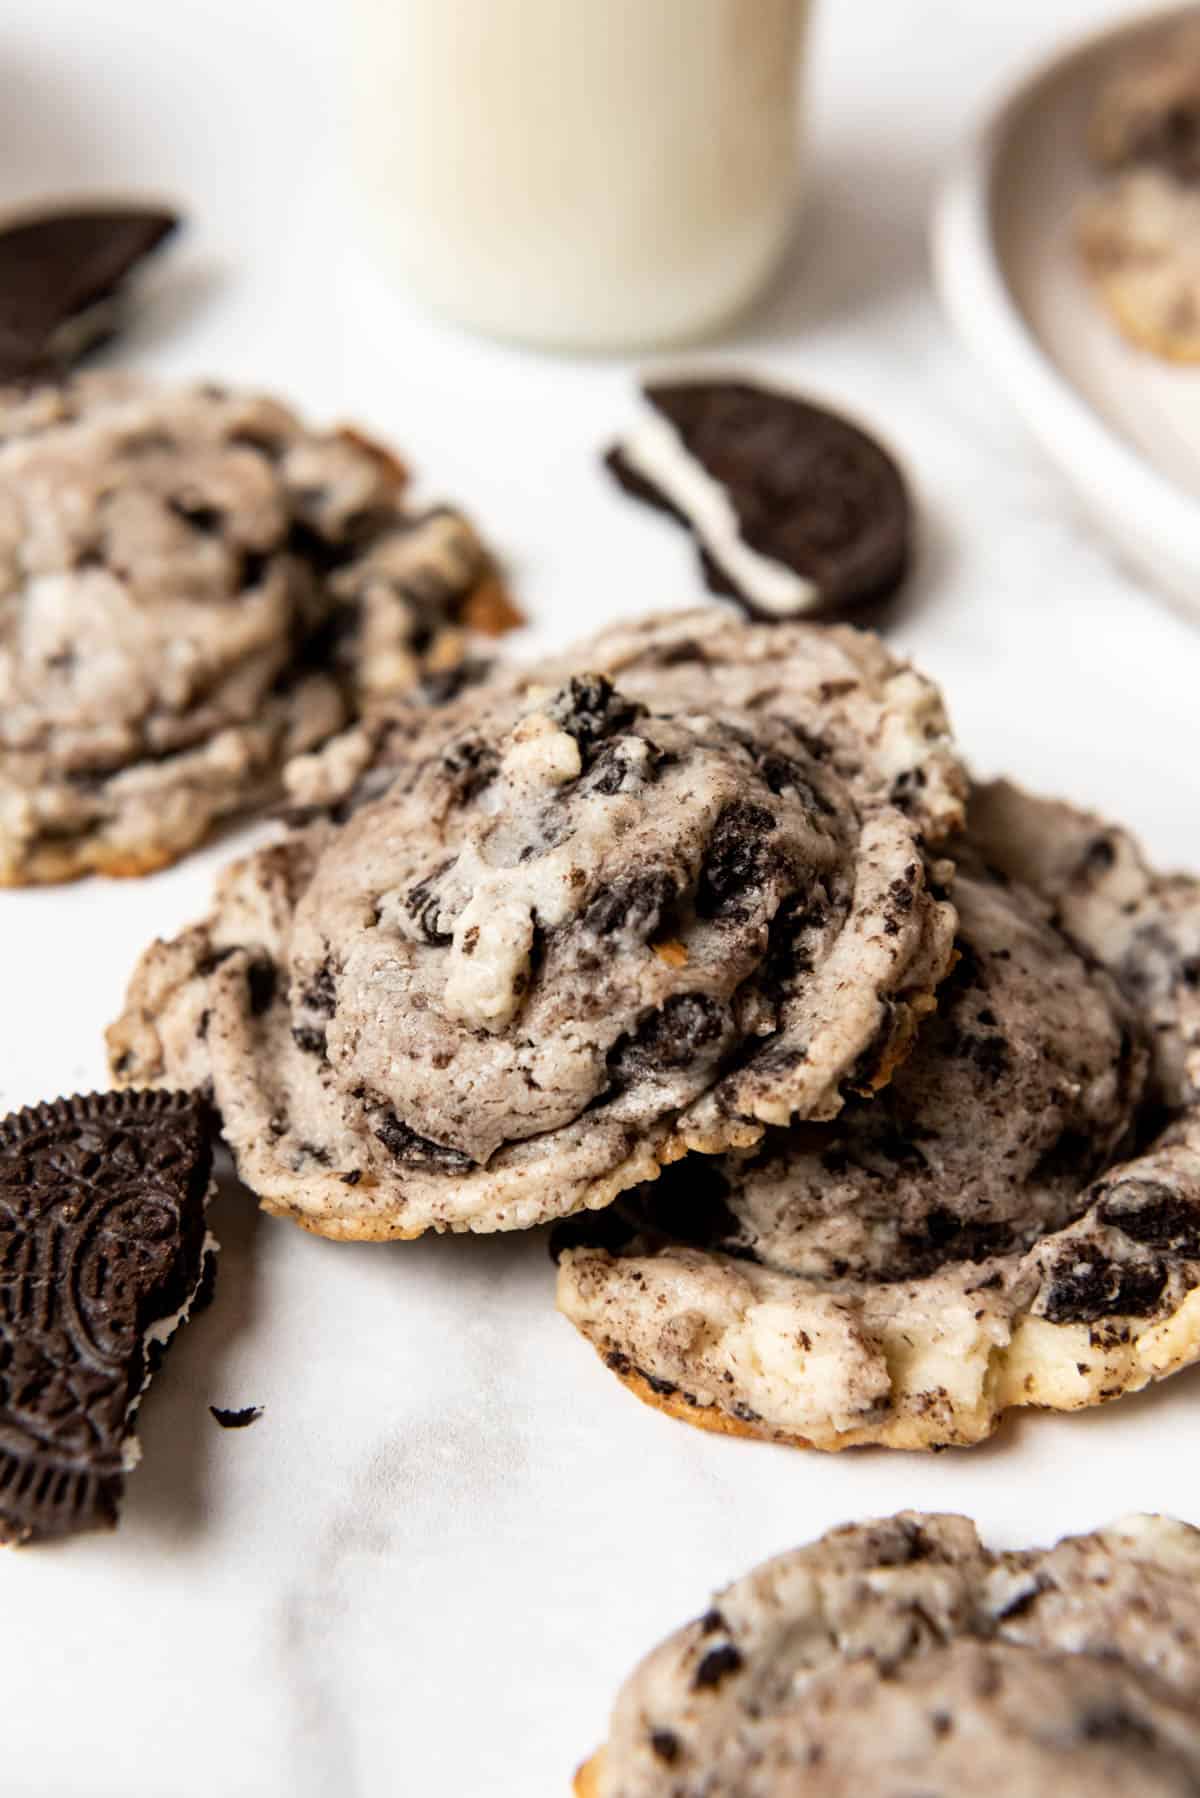 Oreo cheesecake cookies next to broken Oreo pieces and a glass of milk.